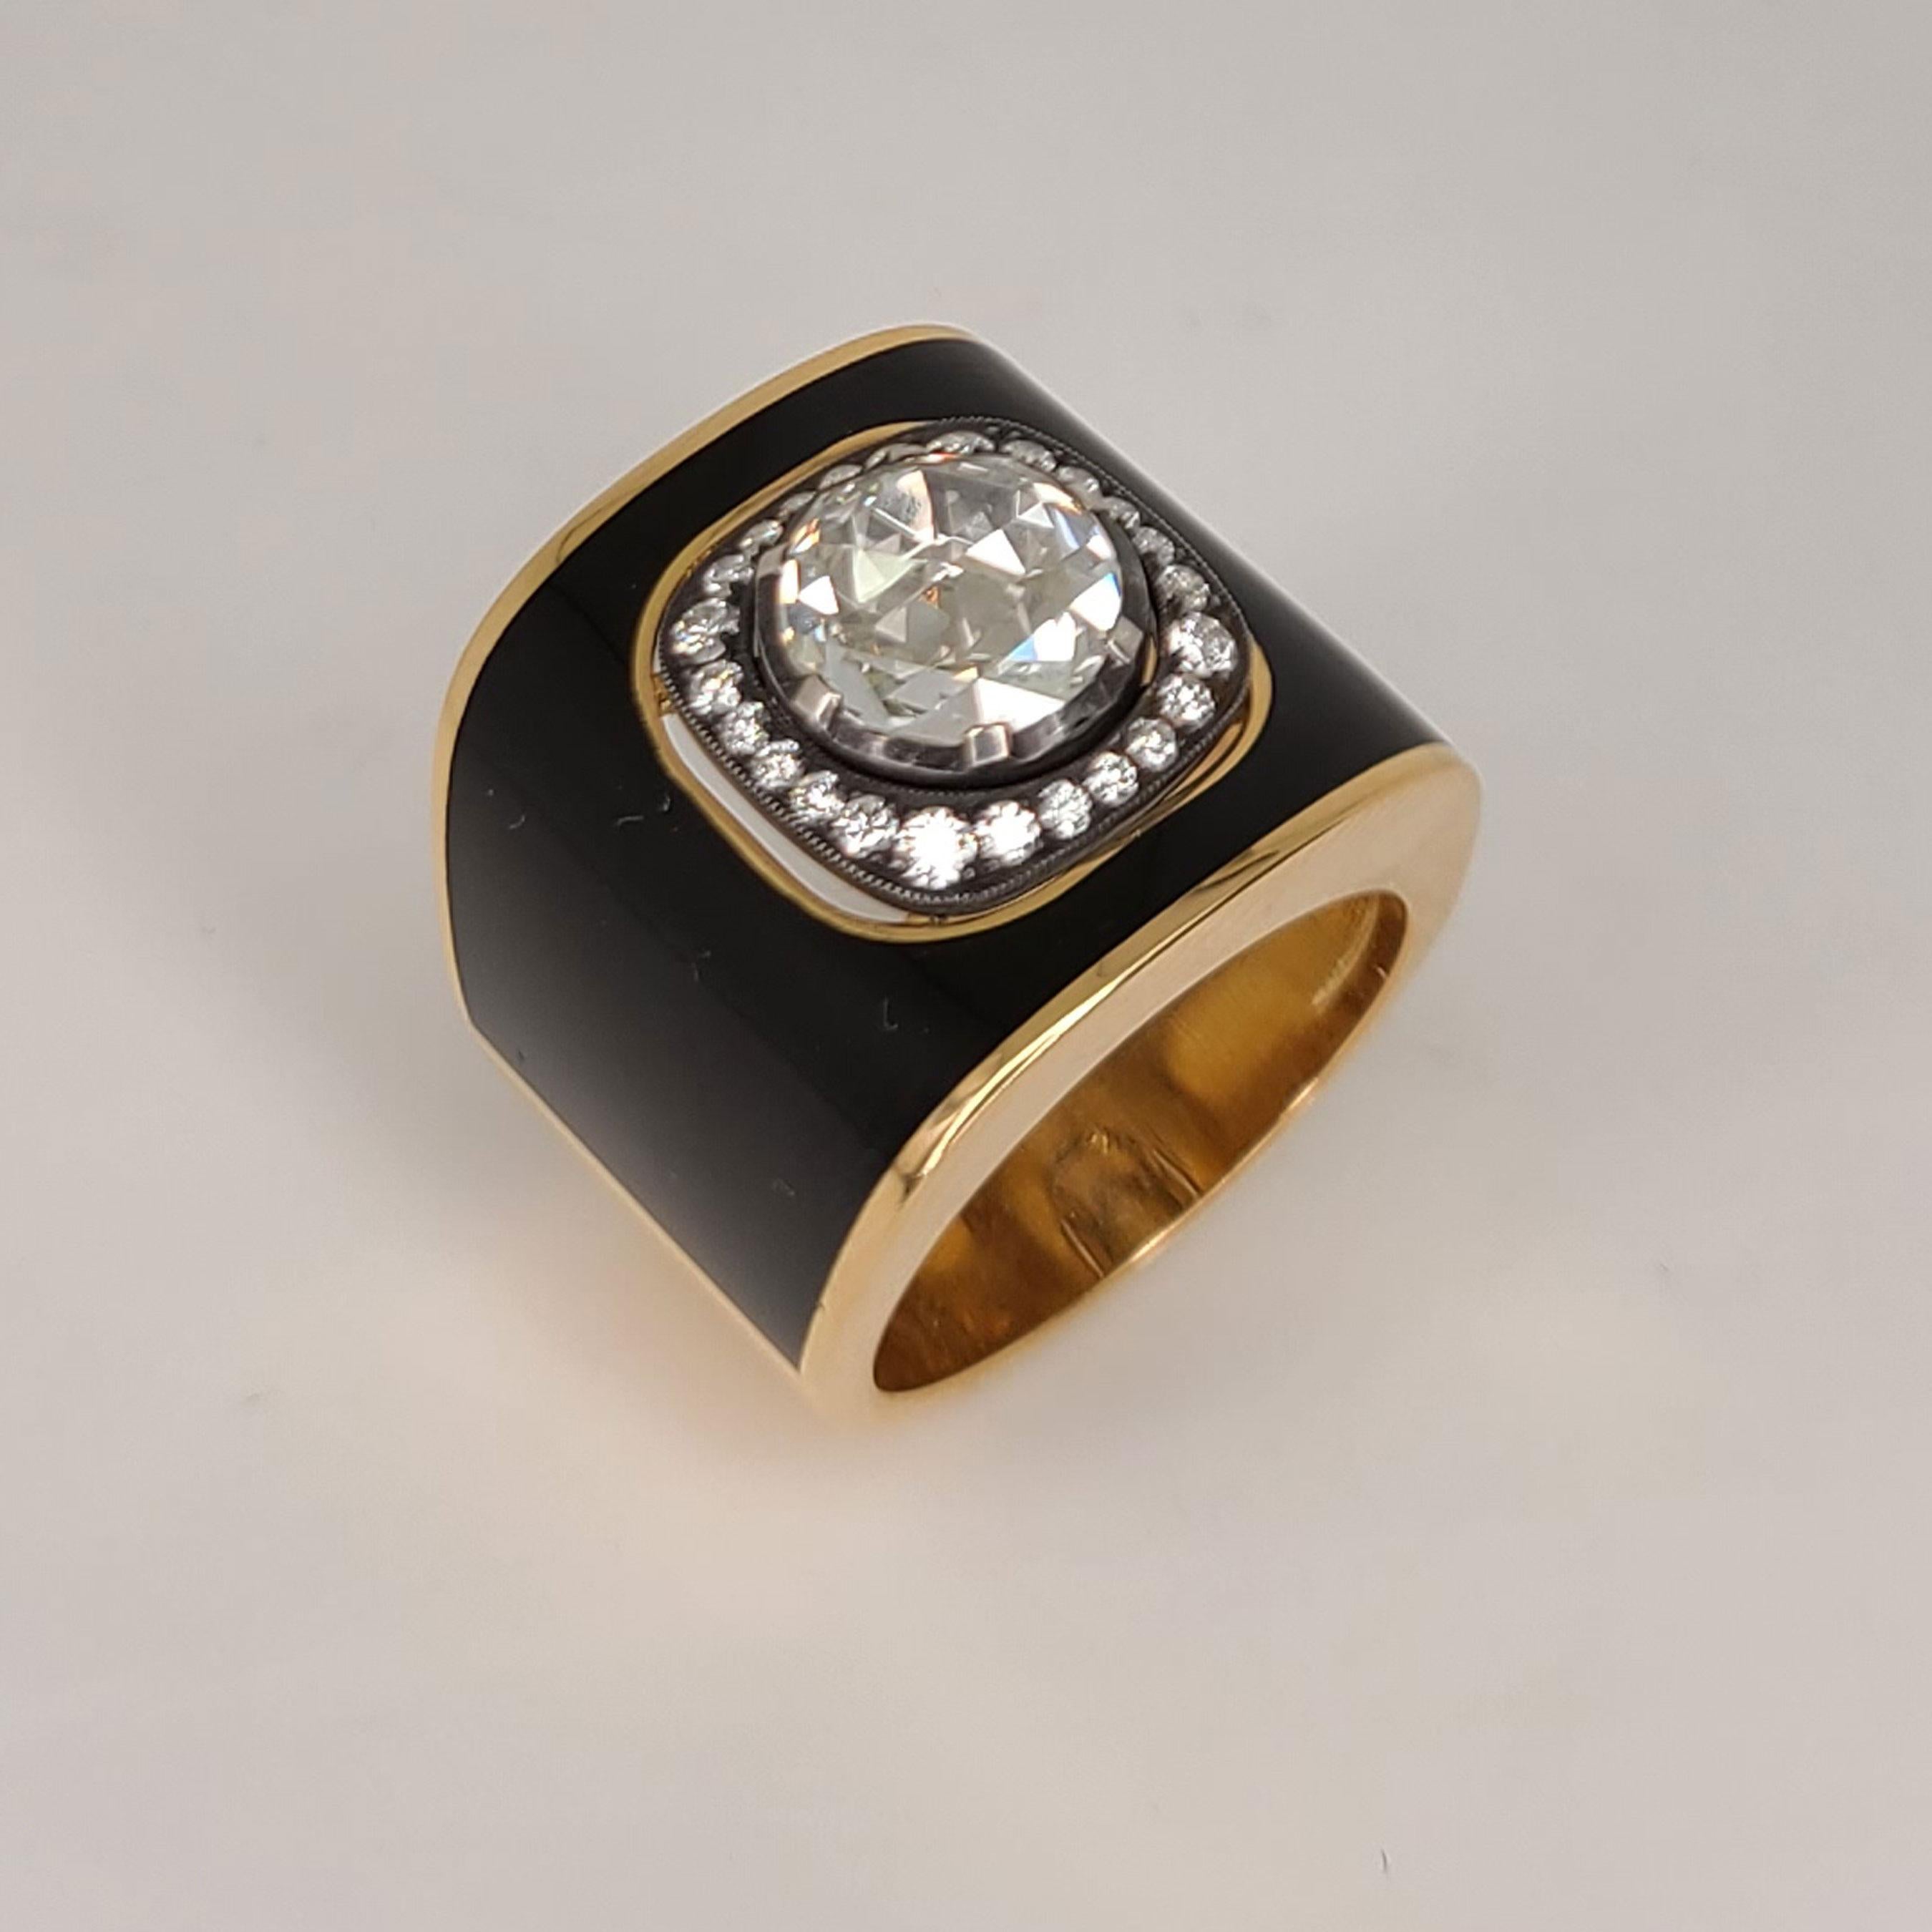 This rare 18K Rose Gold Ring is inlay-ed with black French enameling and a center Rose-cut Diamond of 1.62cts and has pave-set Diamonds of 0.30cts around it. Only the center stone is set on a silver to maintain its classic fashion characteristics as